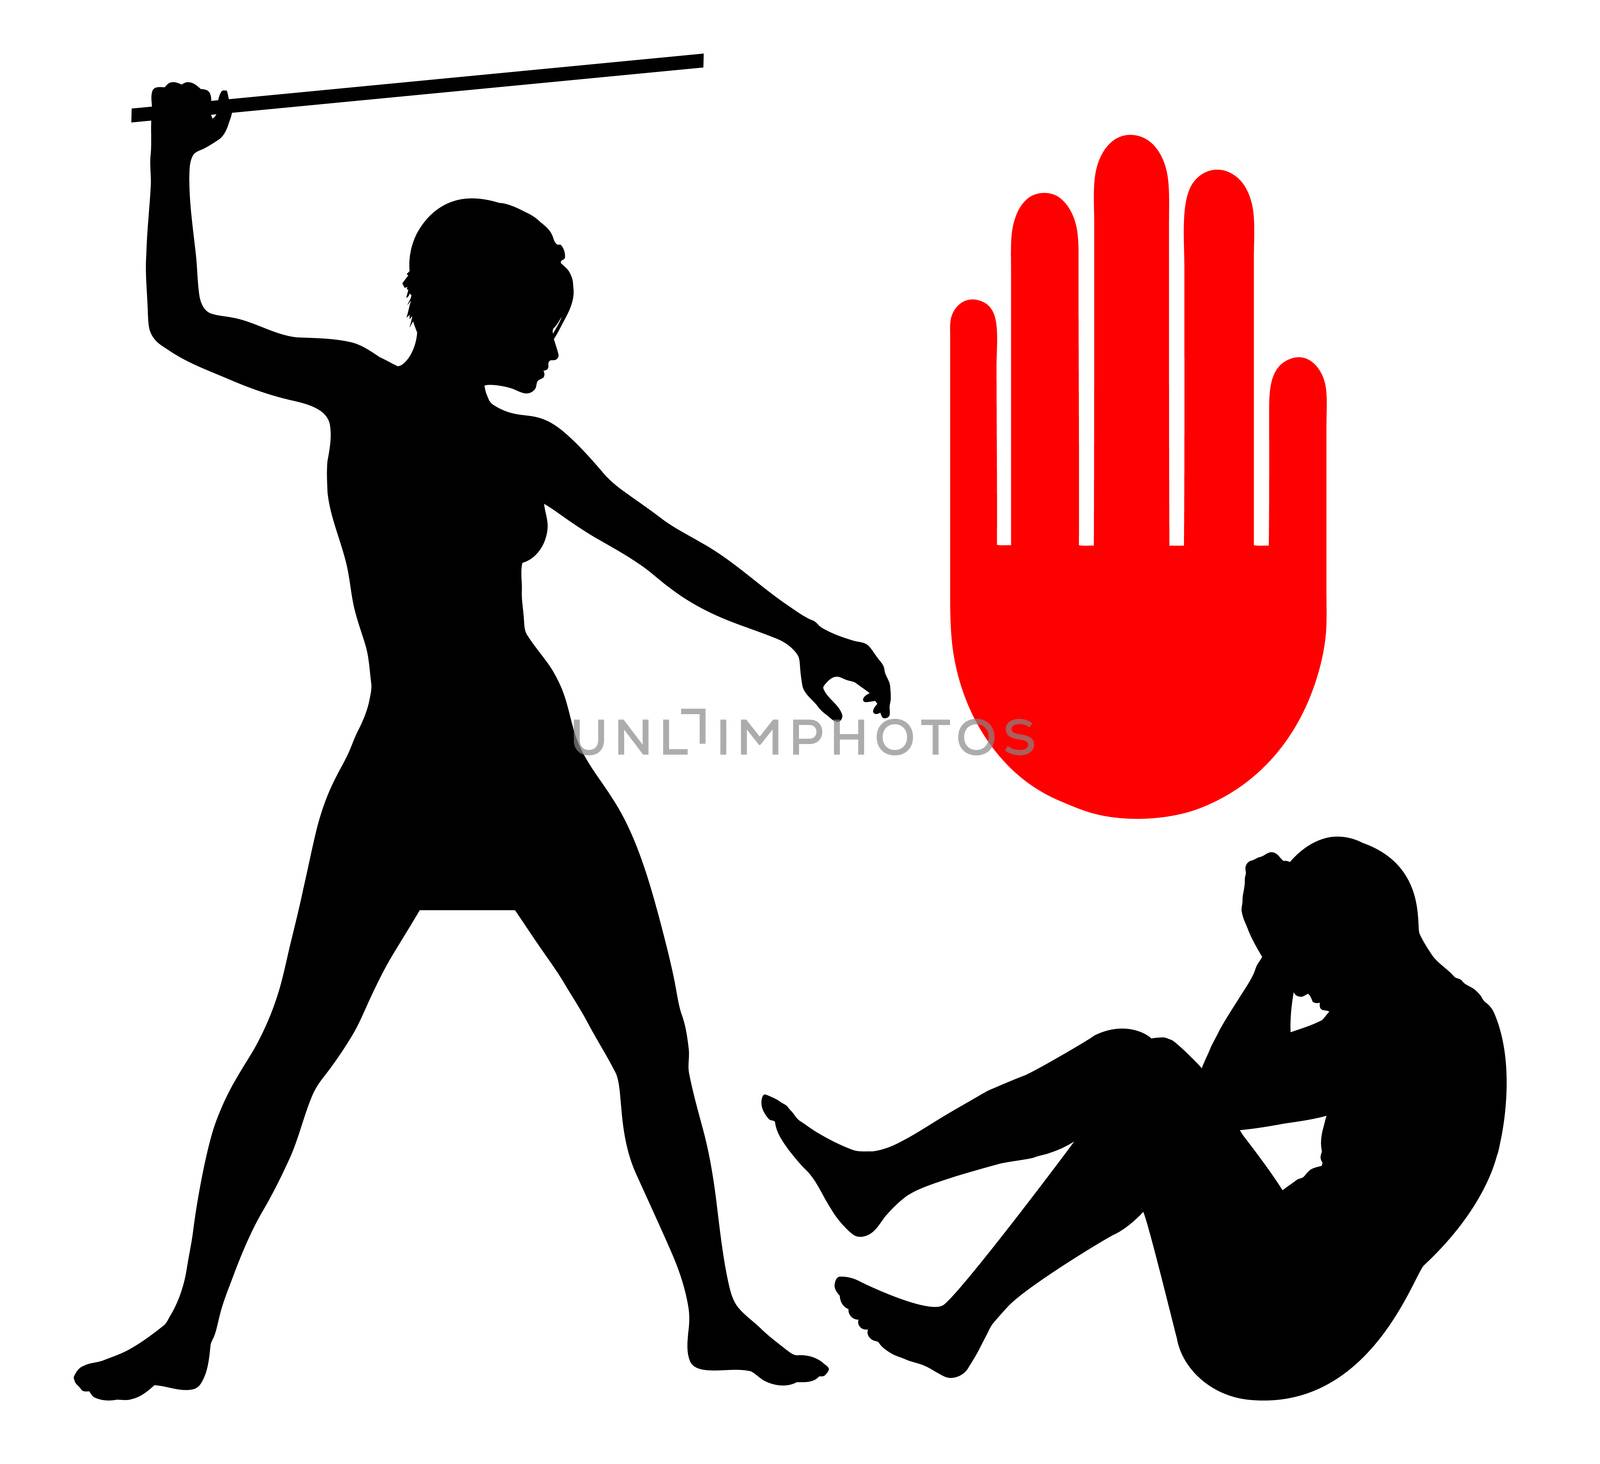 Concept sign of a man in an abusive relationship with woman which must stop